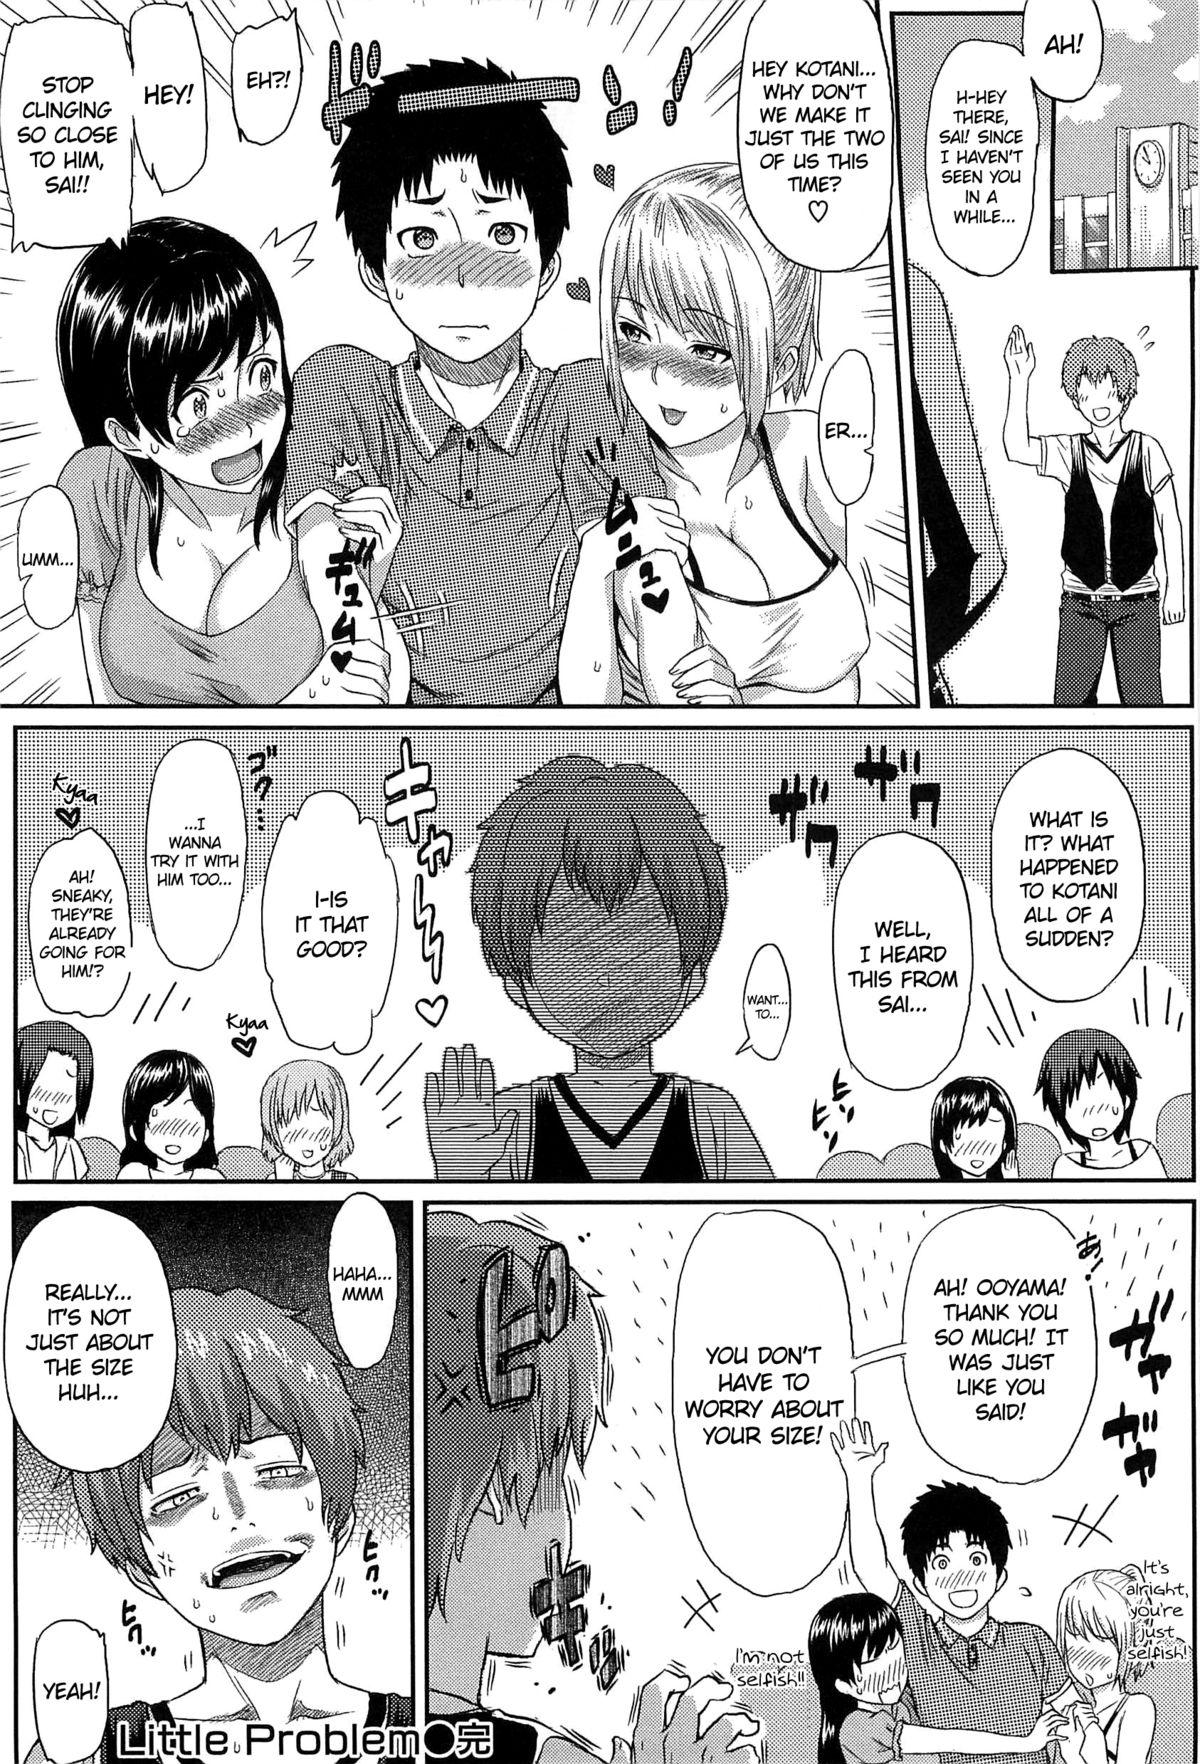 Asses Ibitsuna Ch. 8 - Little Problem Slapping - Page 20